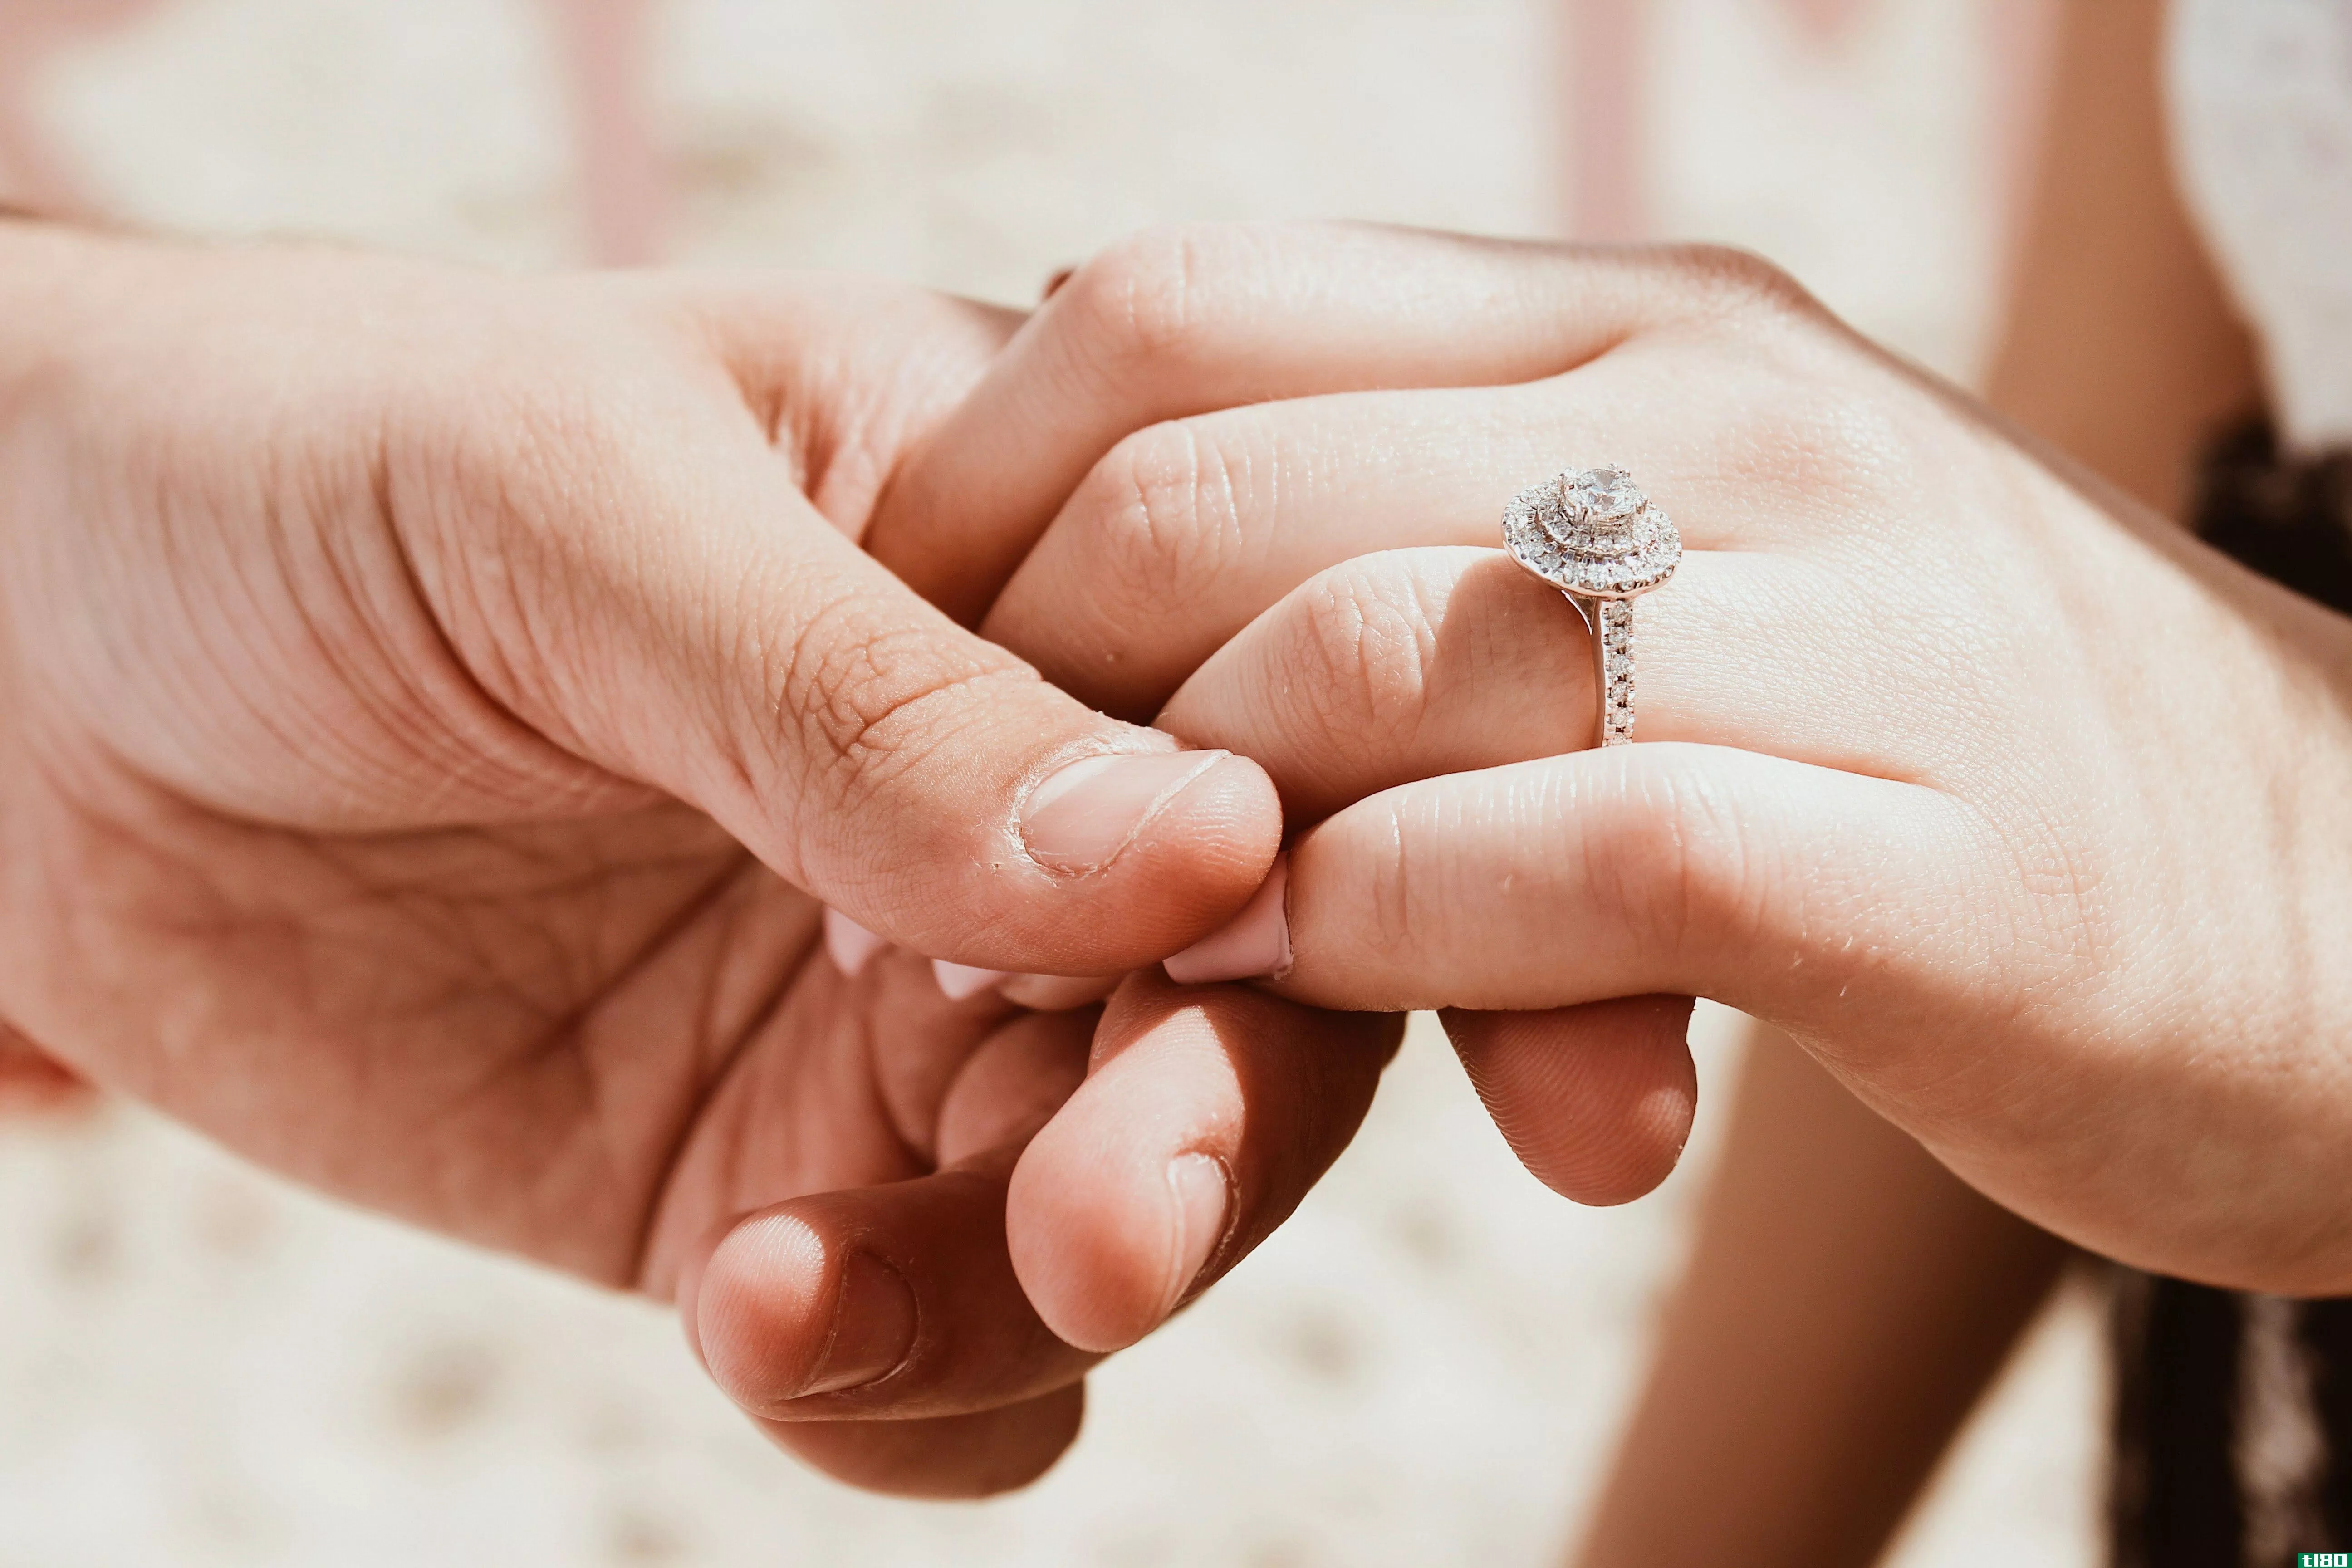 Hands held with wedding ring